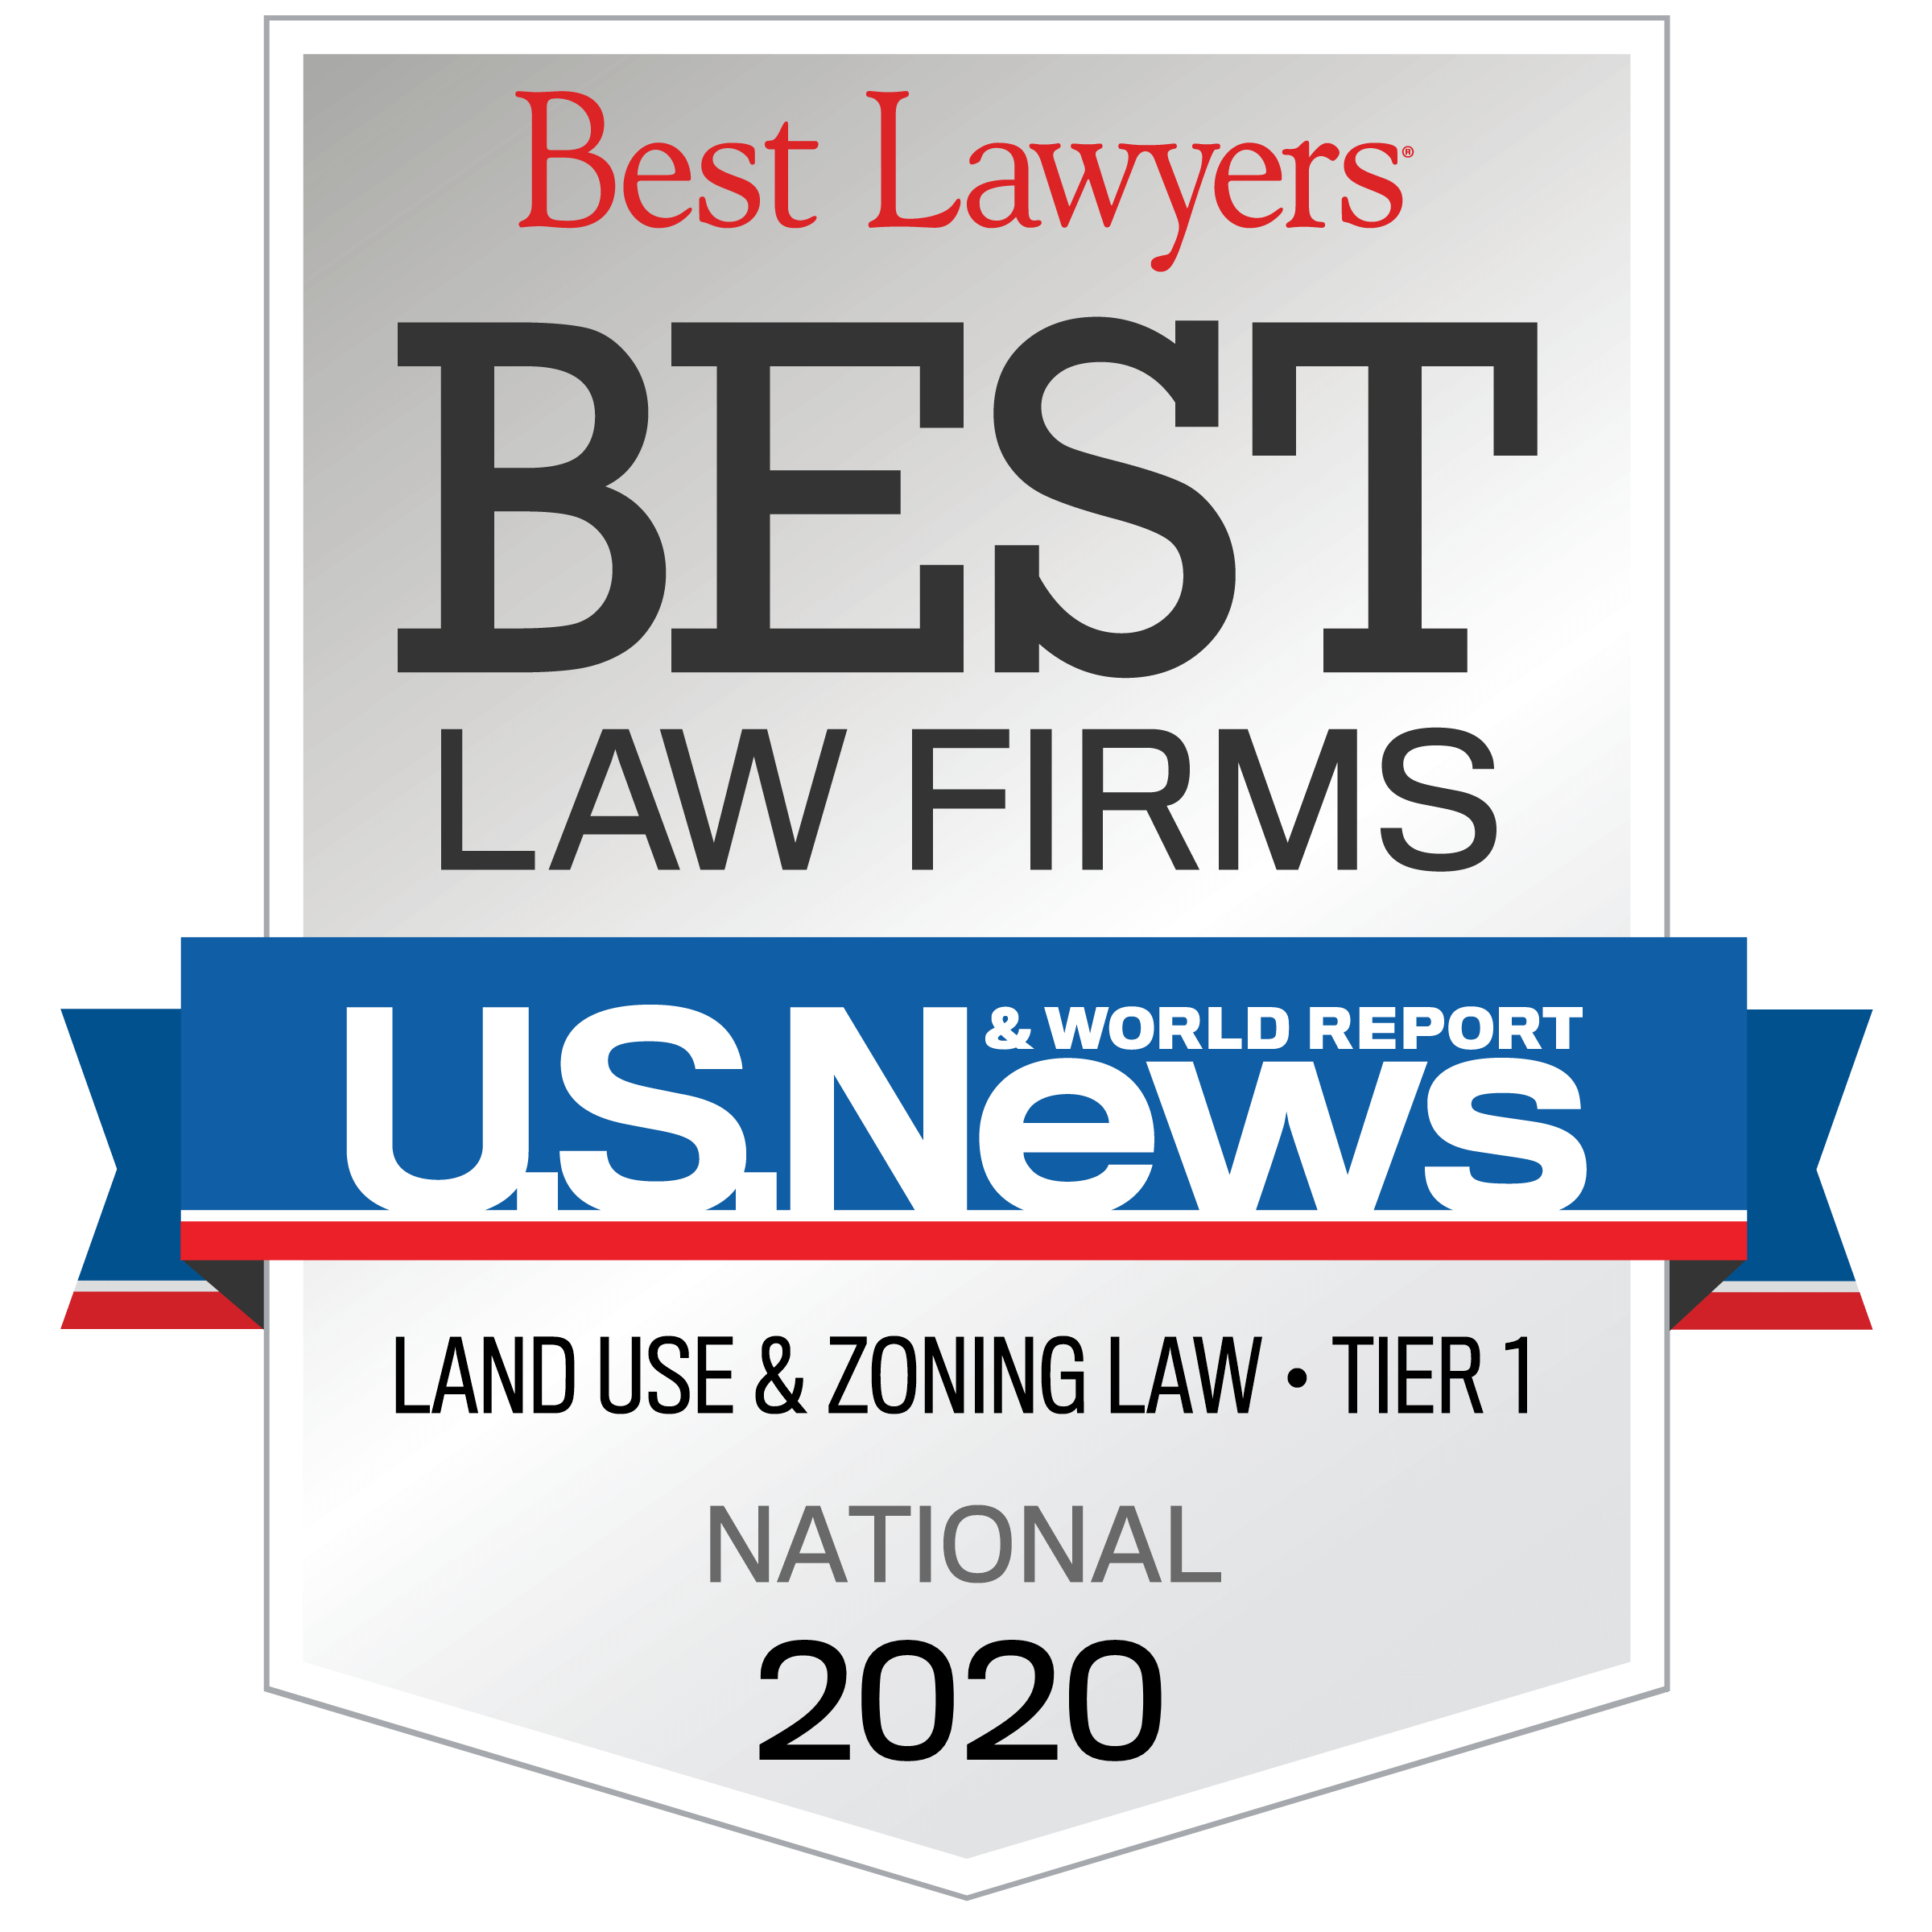 Best Lawyers - Best Law Firms 2020 Badge